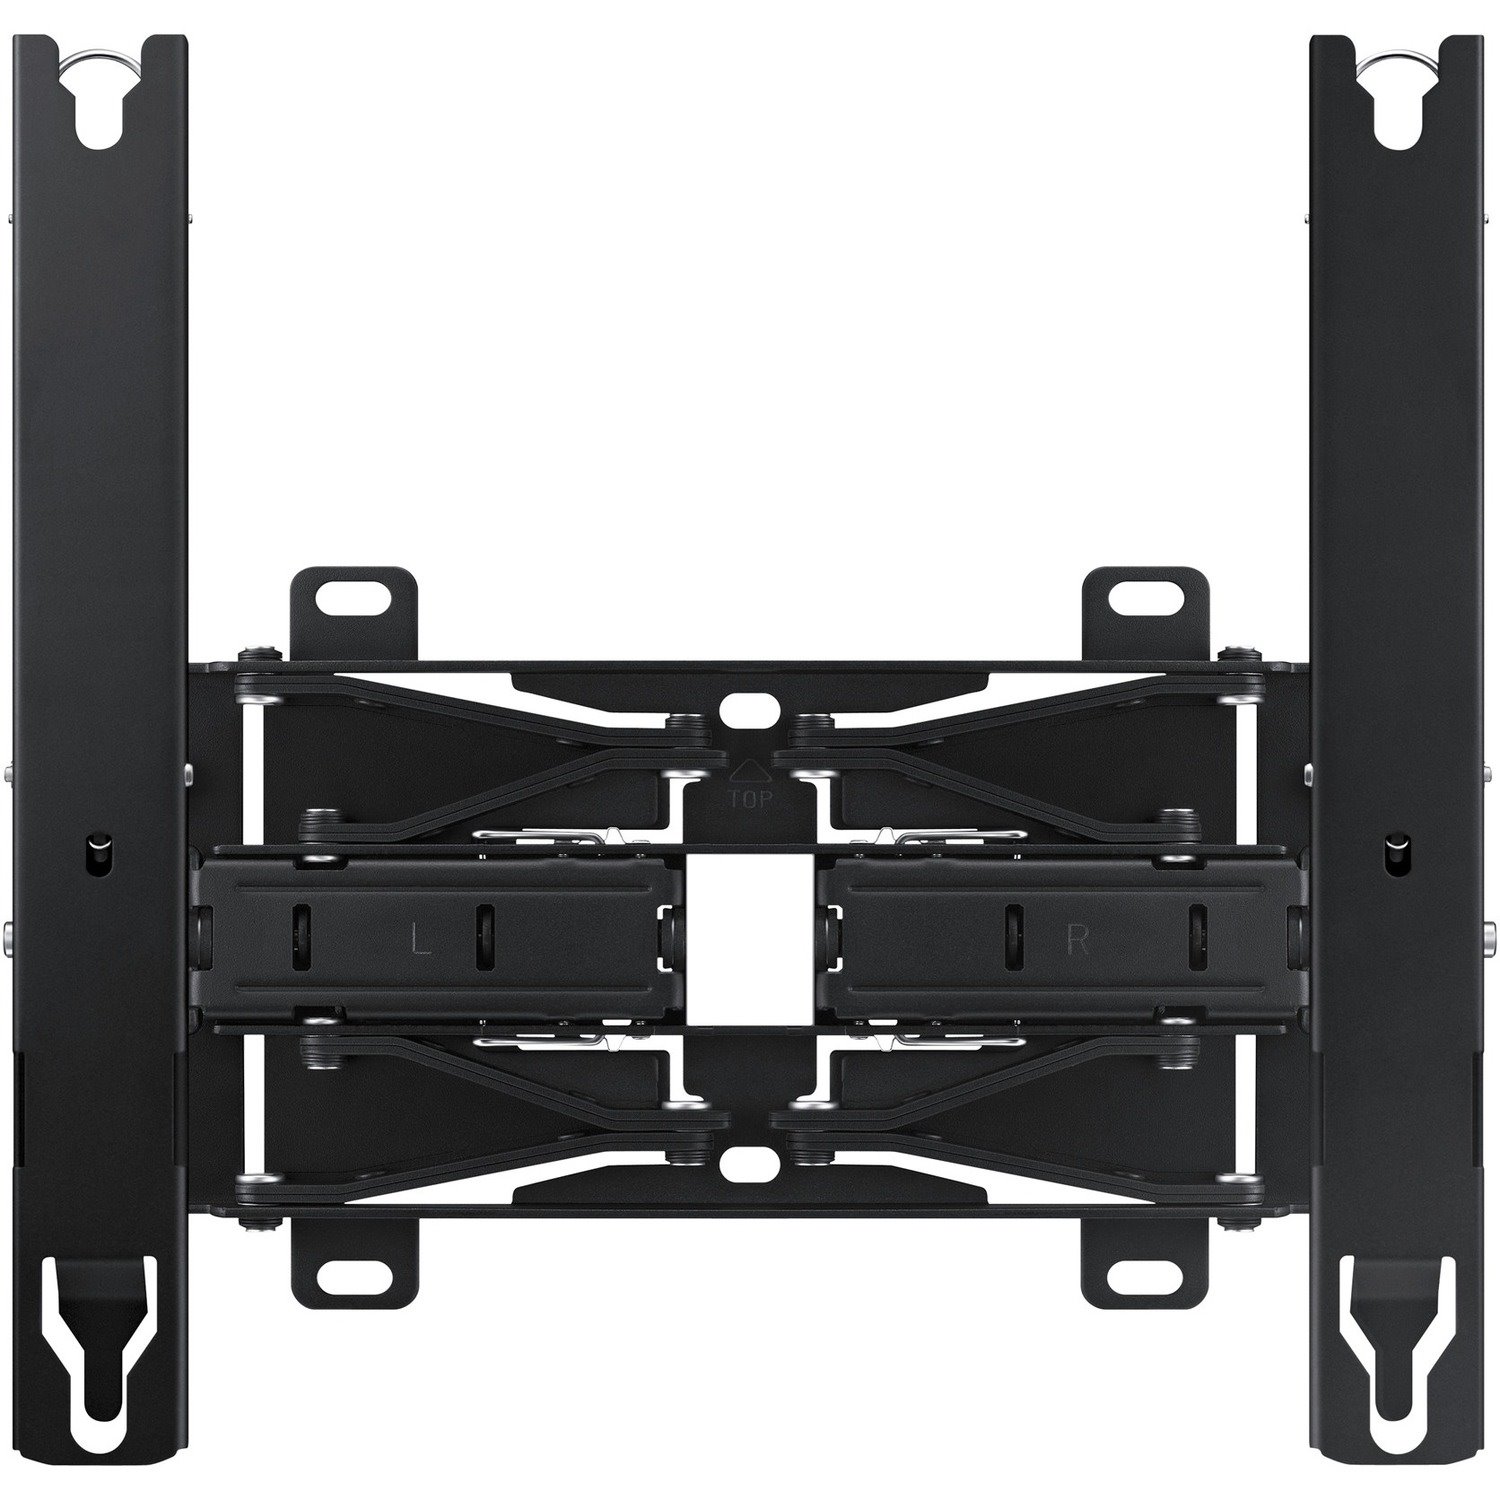 Samsung WMN4277TT/XY Wall Mount for TV, LED Display